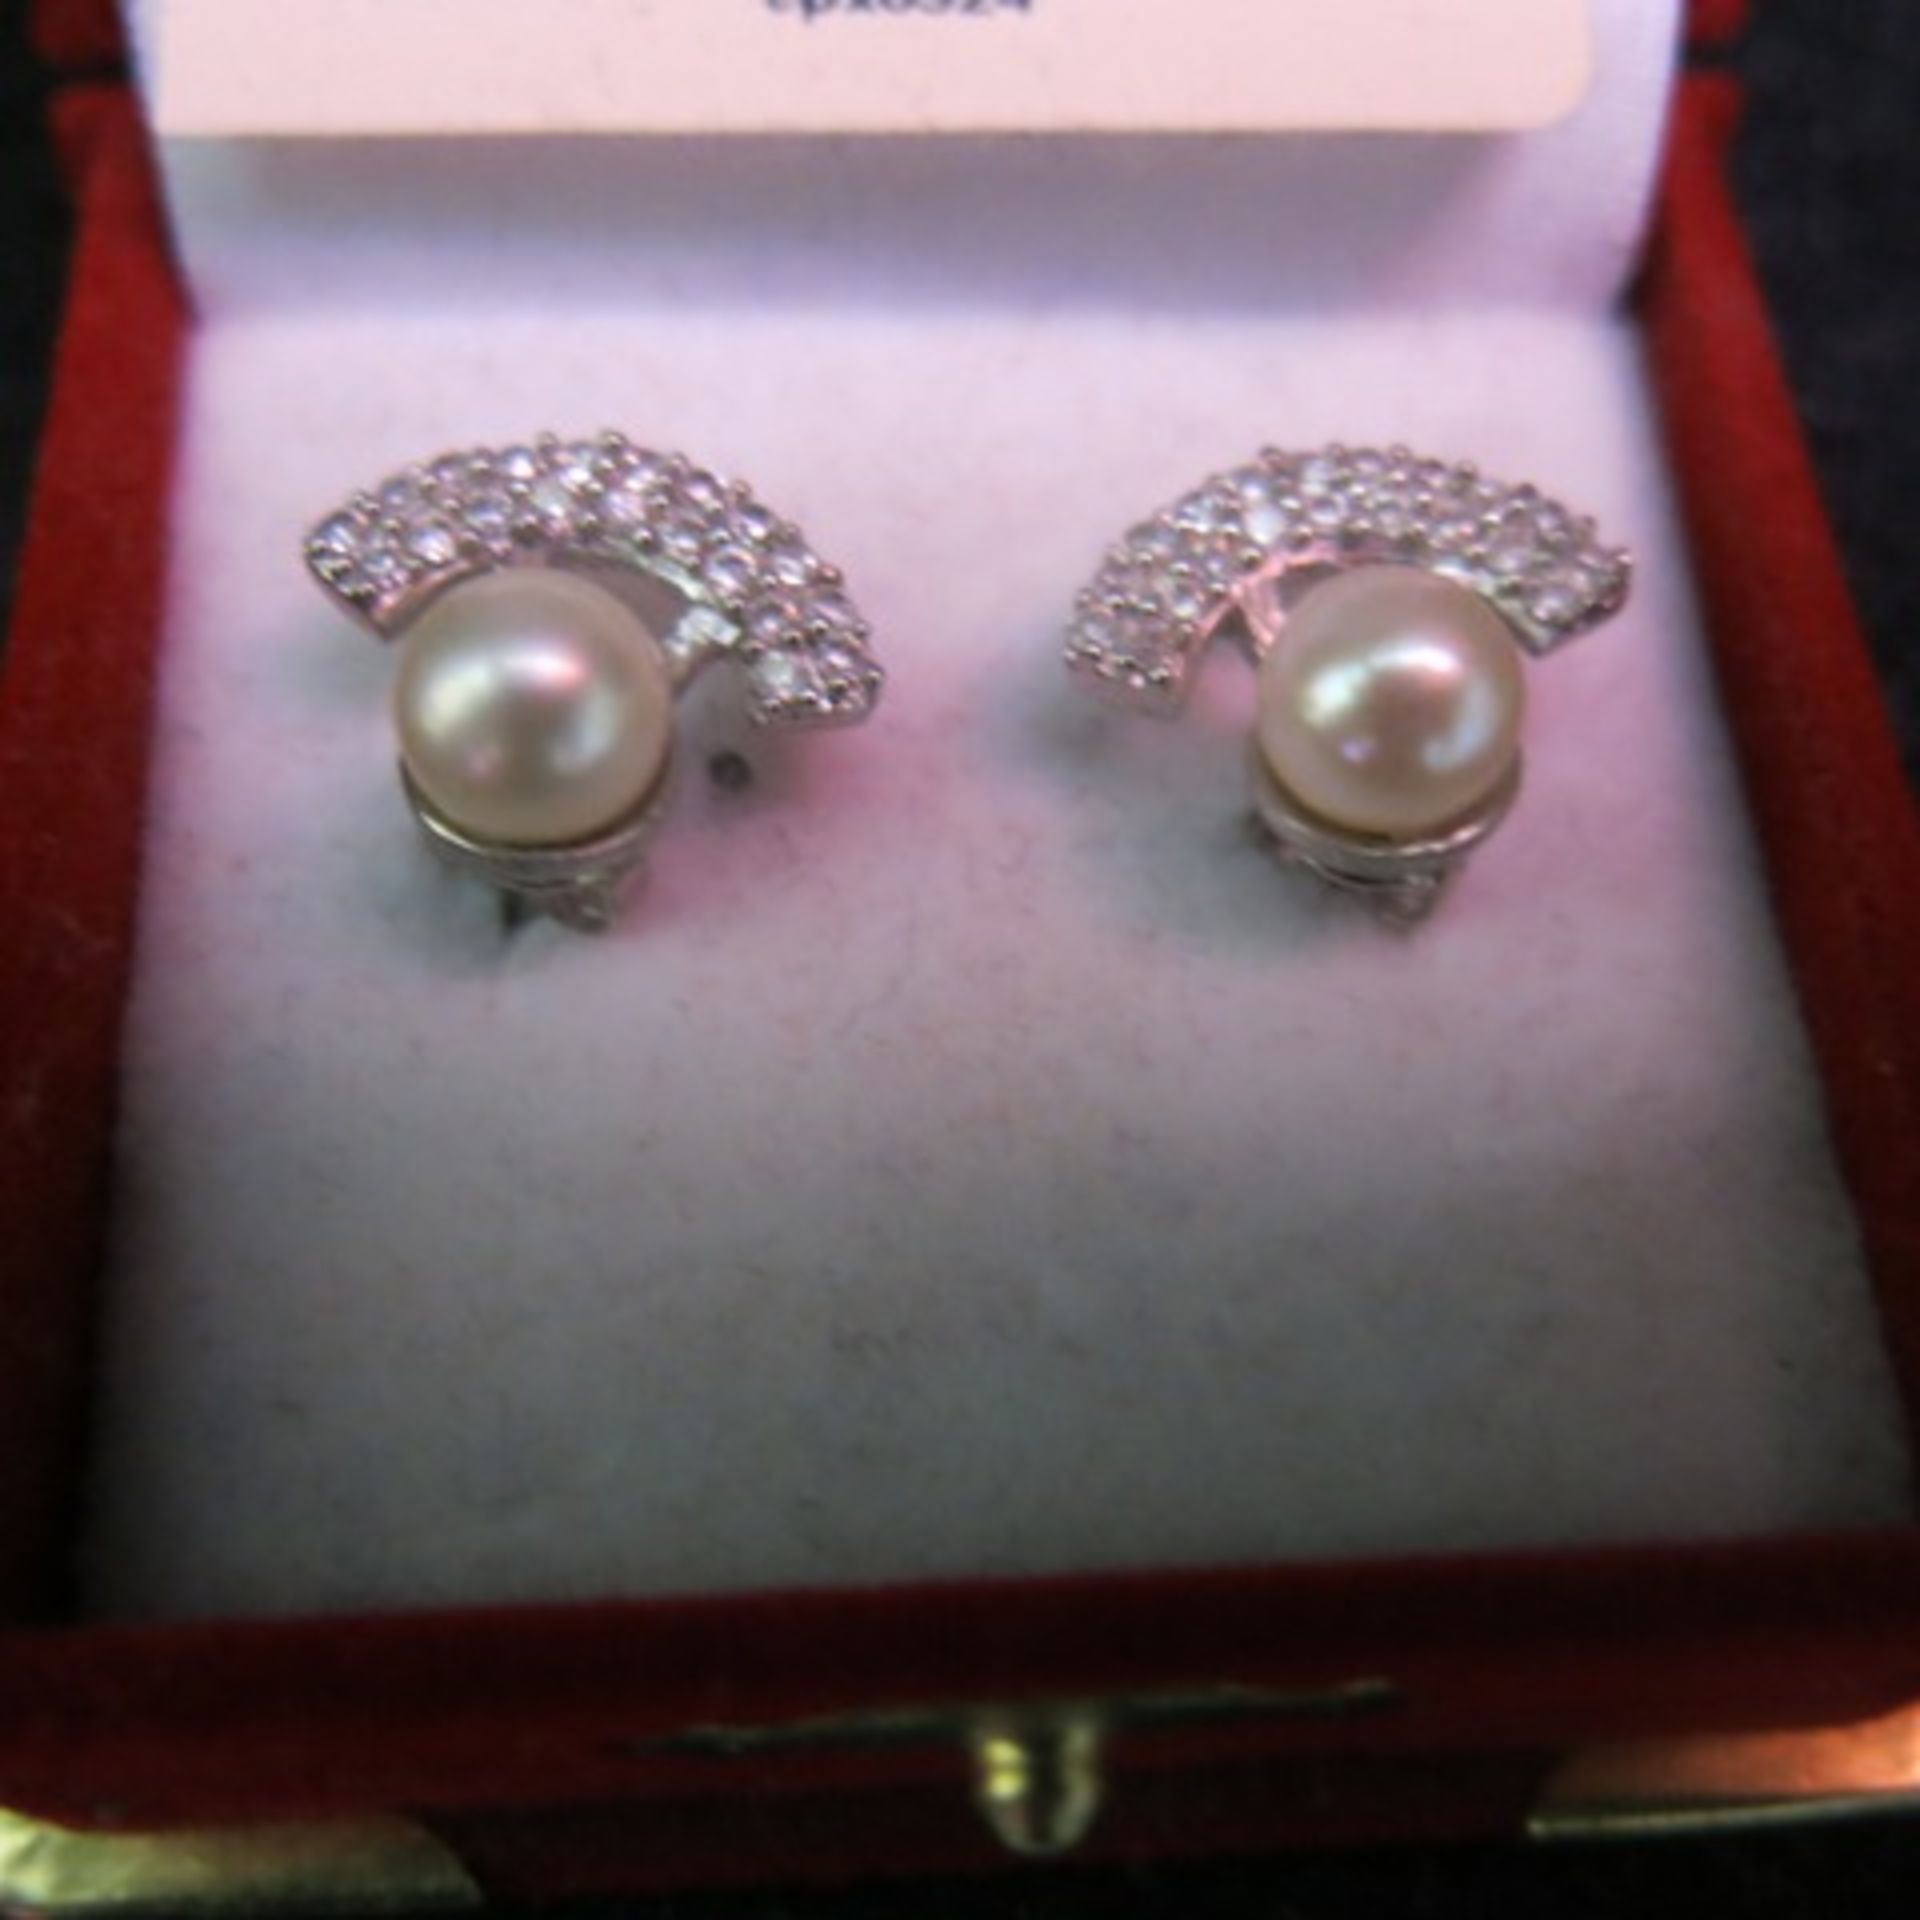 Pair of Pearl 7mm Stud Earrings with White Metal & Clear Stone Arc Over the Pearl. RRP £178.00 - Image 2 of 2